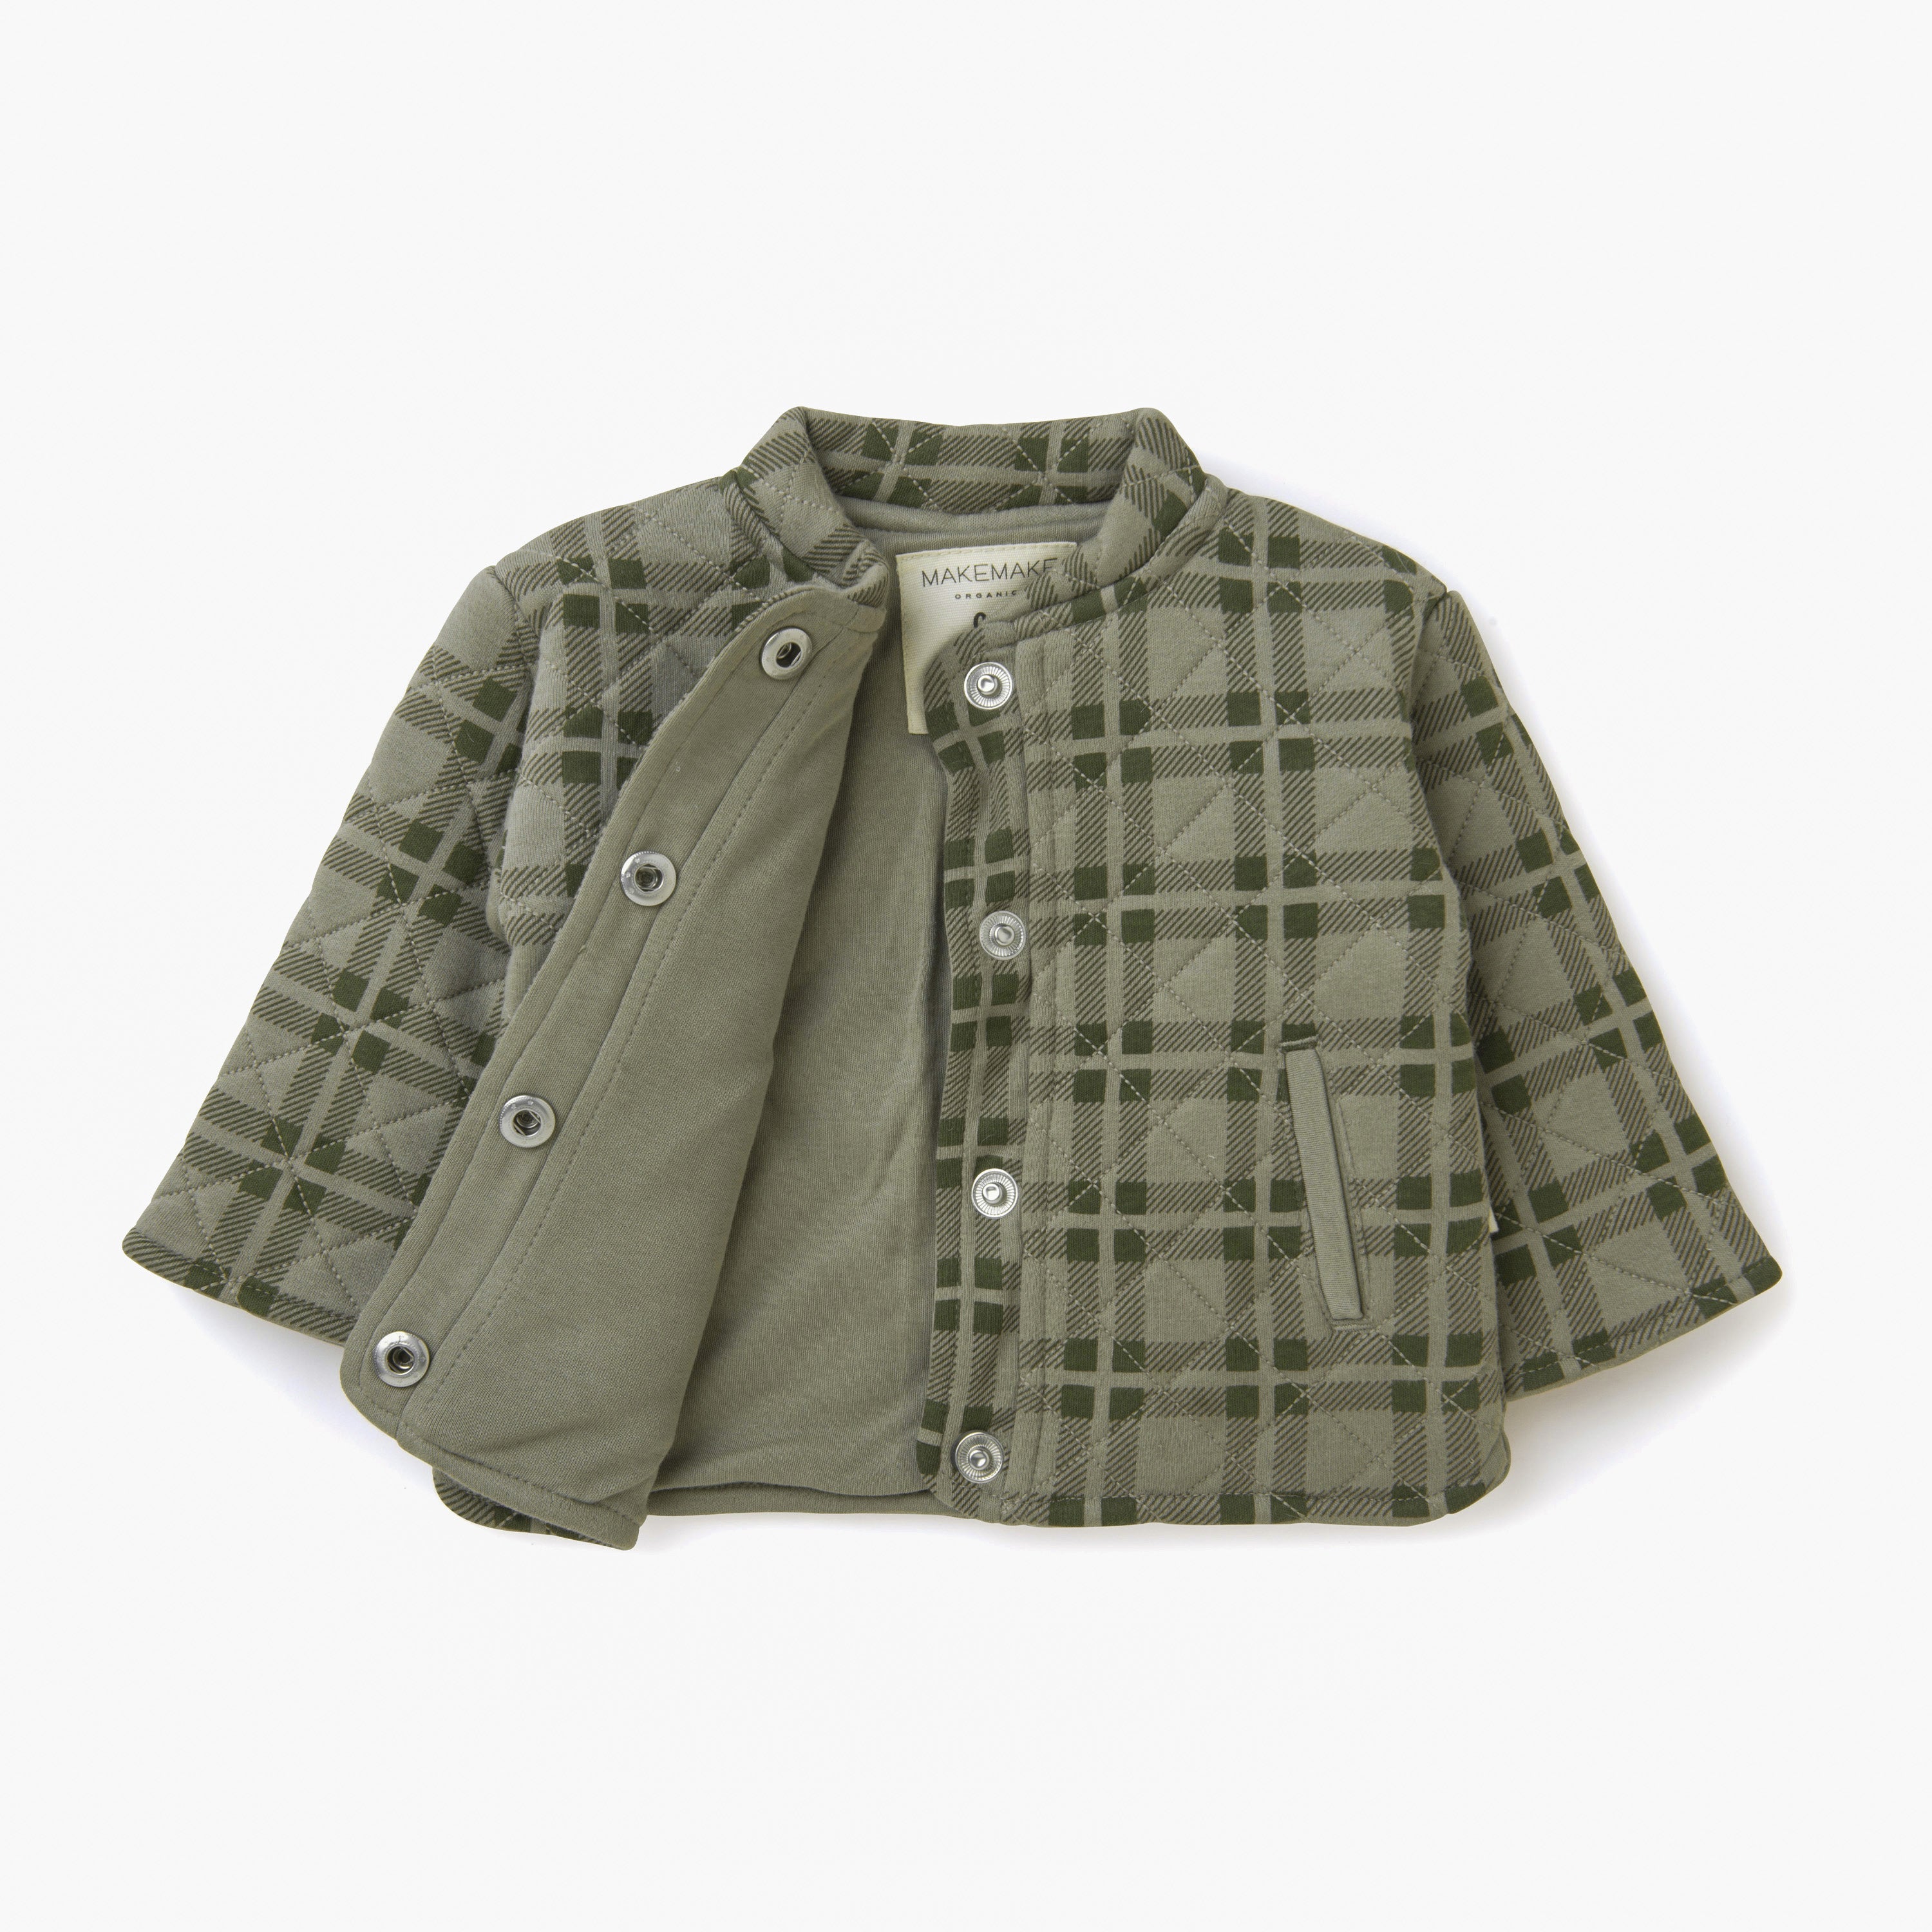 A green plaid children's jacket from Organic Kids, featuring a collar and front buttons, displayed flat against a white background.